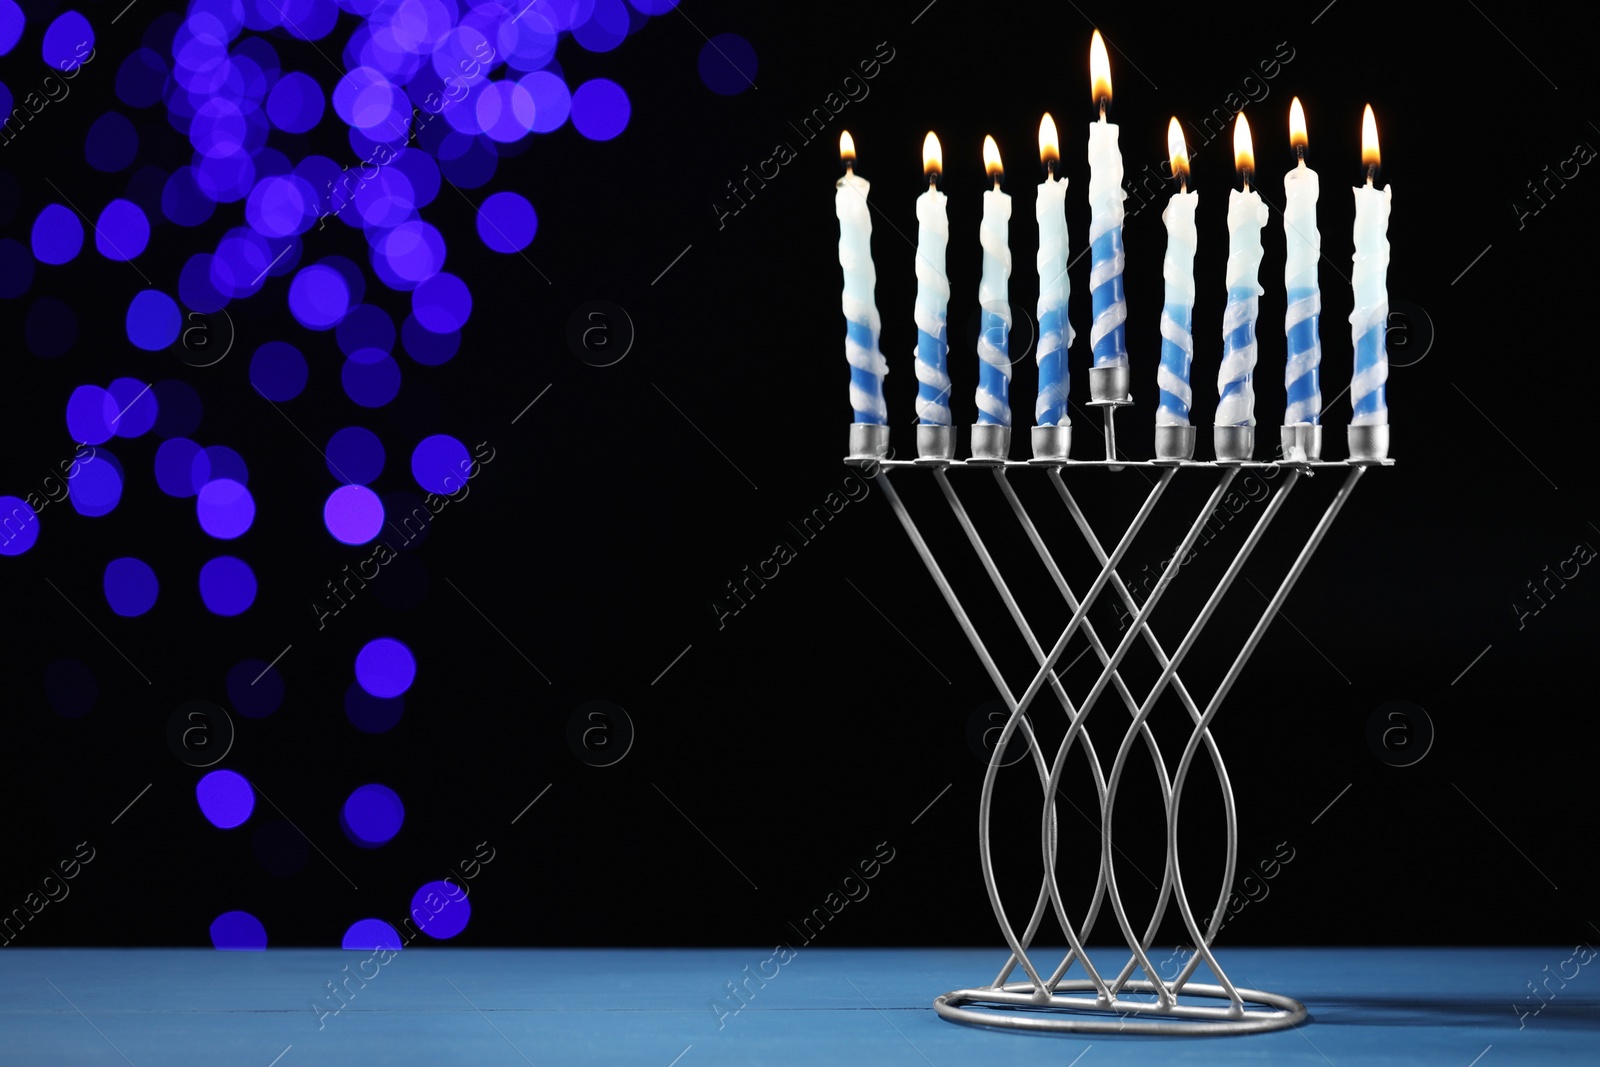 Photo of Hanukkah celebration. Menorah with burning candles on blue table against dark background with blurred lights, space for text